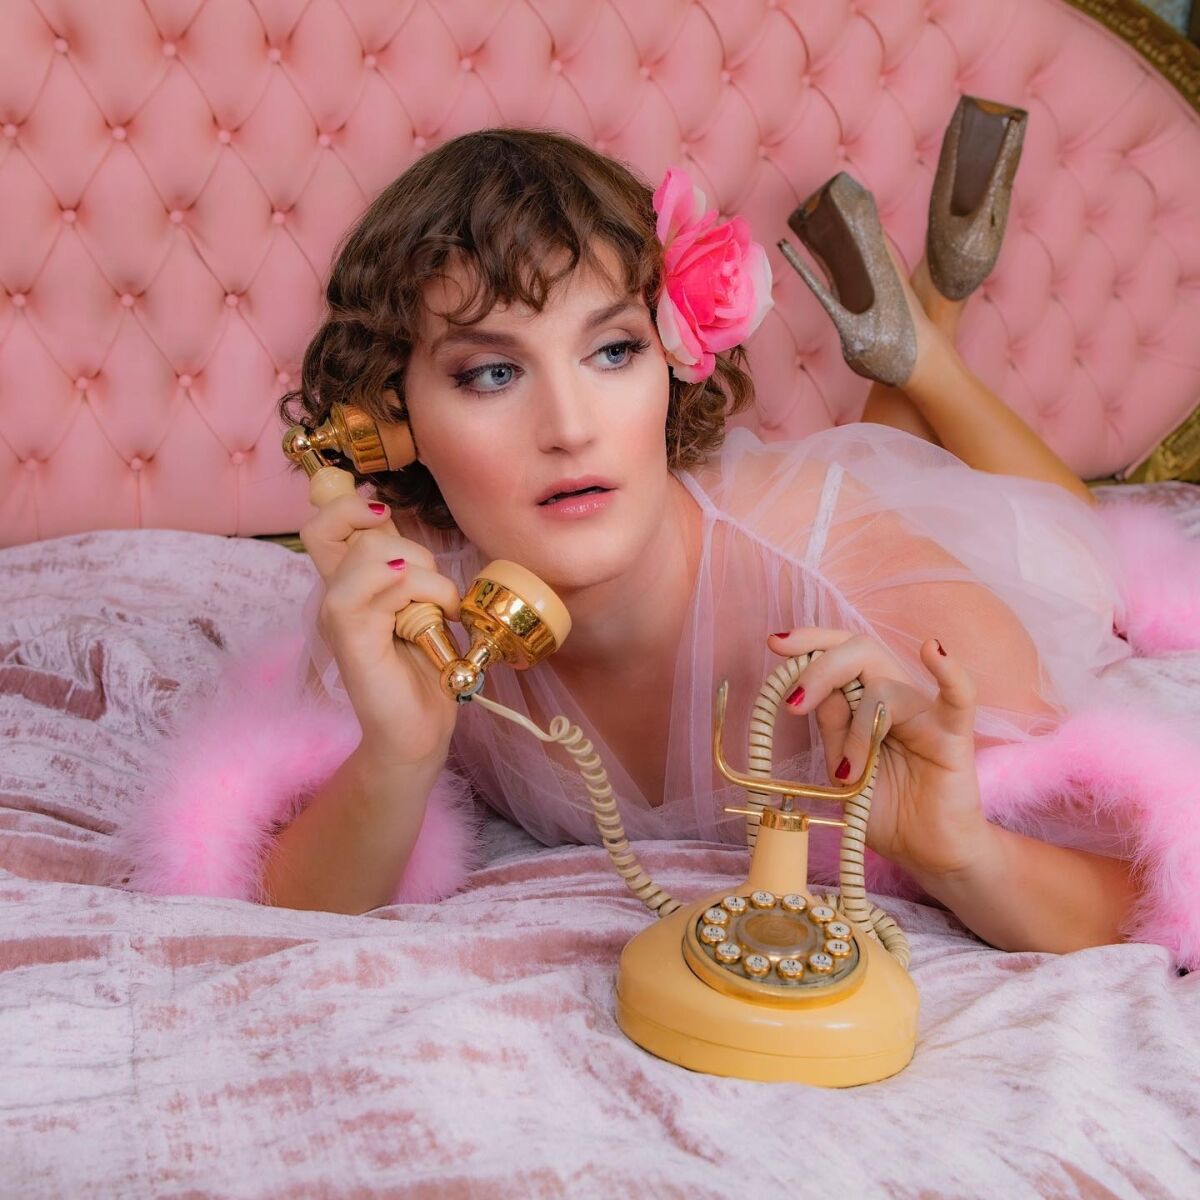 A woman in a pink nightdress with a flower in her hair lines on her stomach in a bed with a rotary phone to her ear 